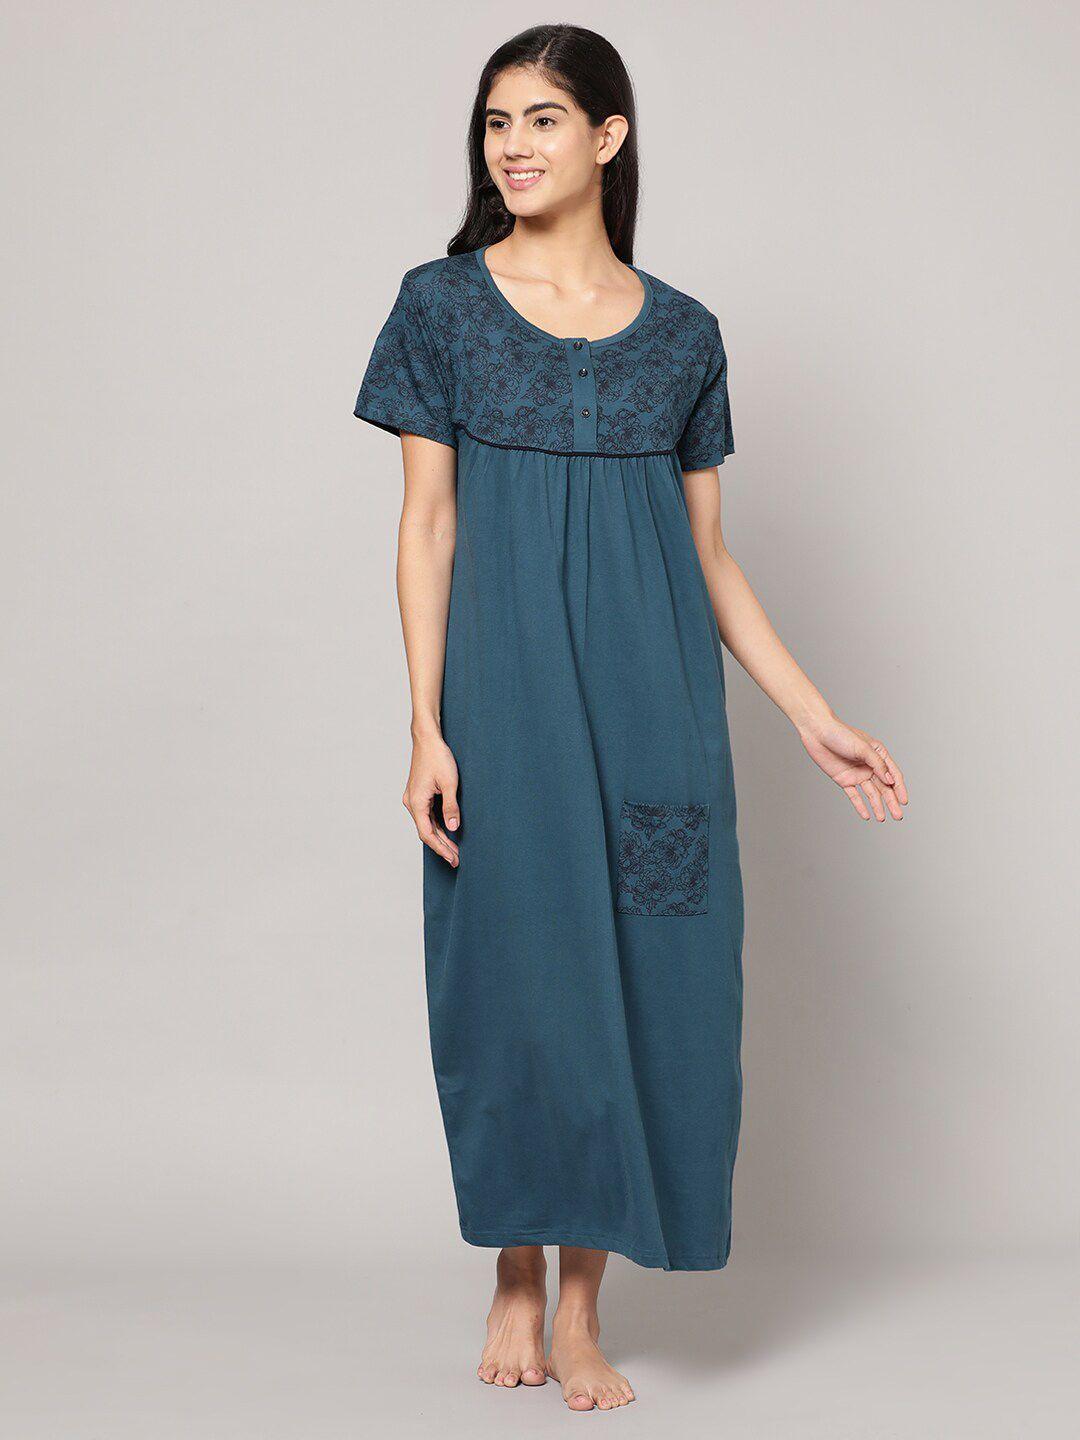 kryptic floral printed pure cotton maxi nightdress